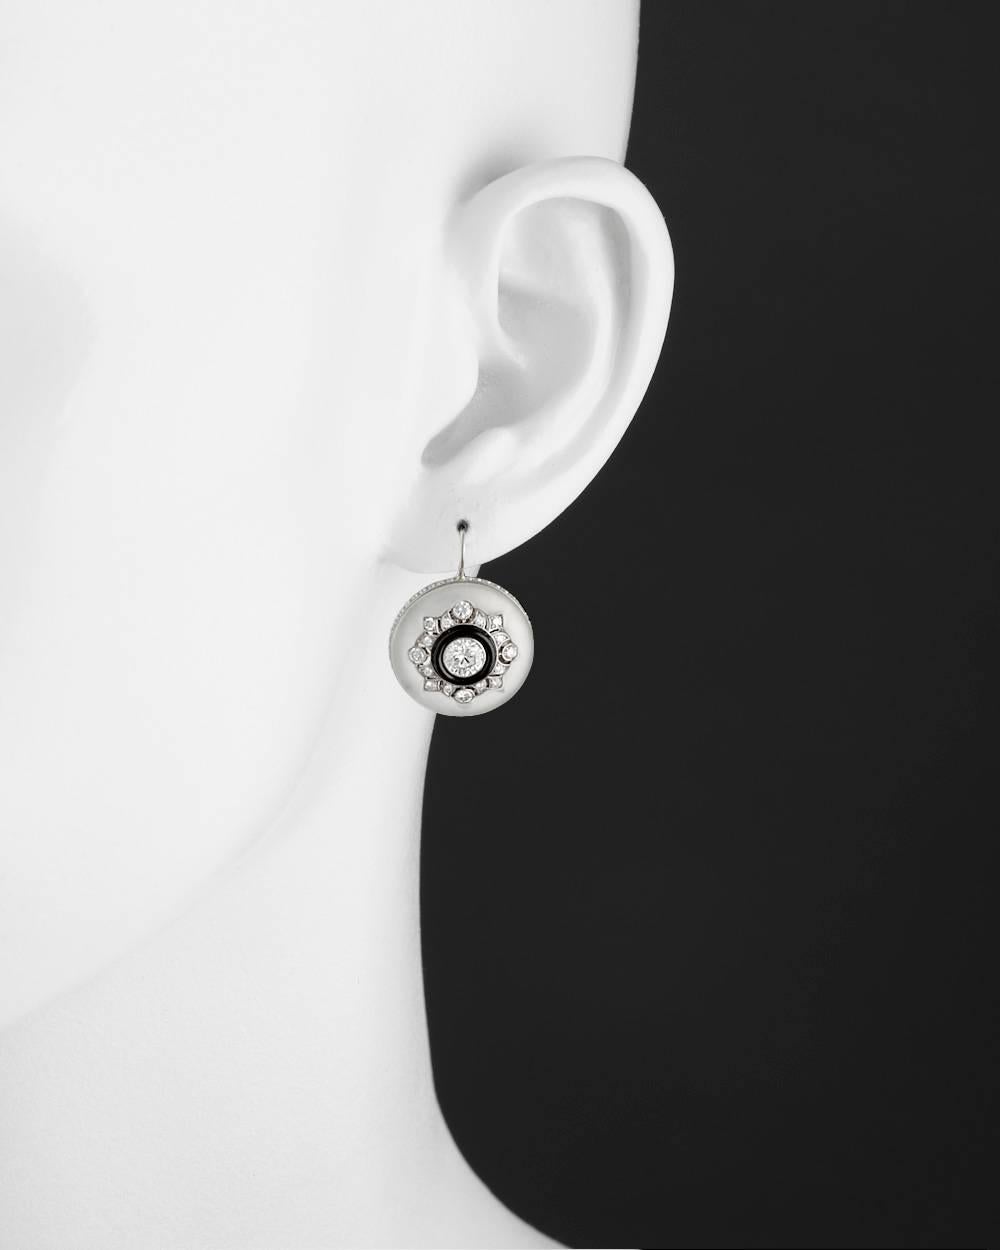 Drop earrings, showcasing a circular-shaped polished rock crystal centering an inset larger round-cut diamond within a carved black onyx frame and openwork round-cut diamond-set lattice, the earrings mounted in 18k white gold with a round-cut